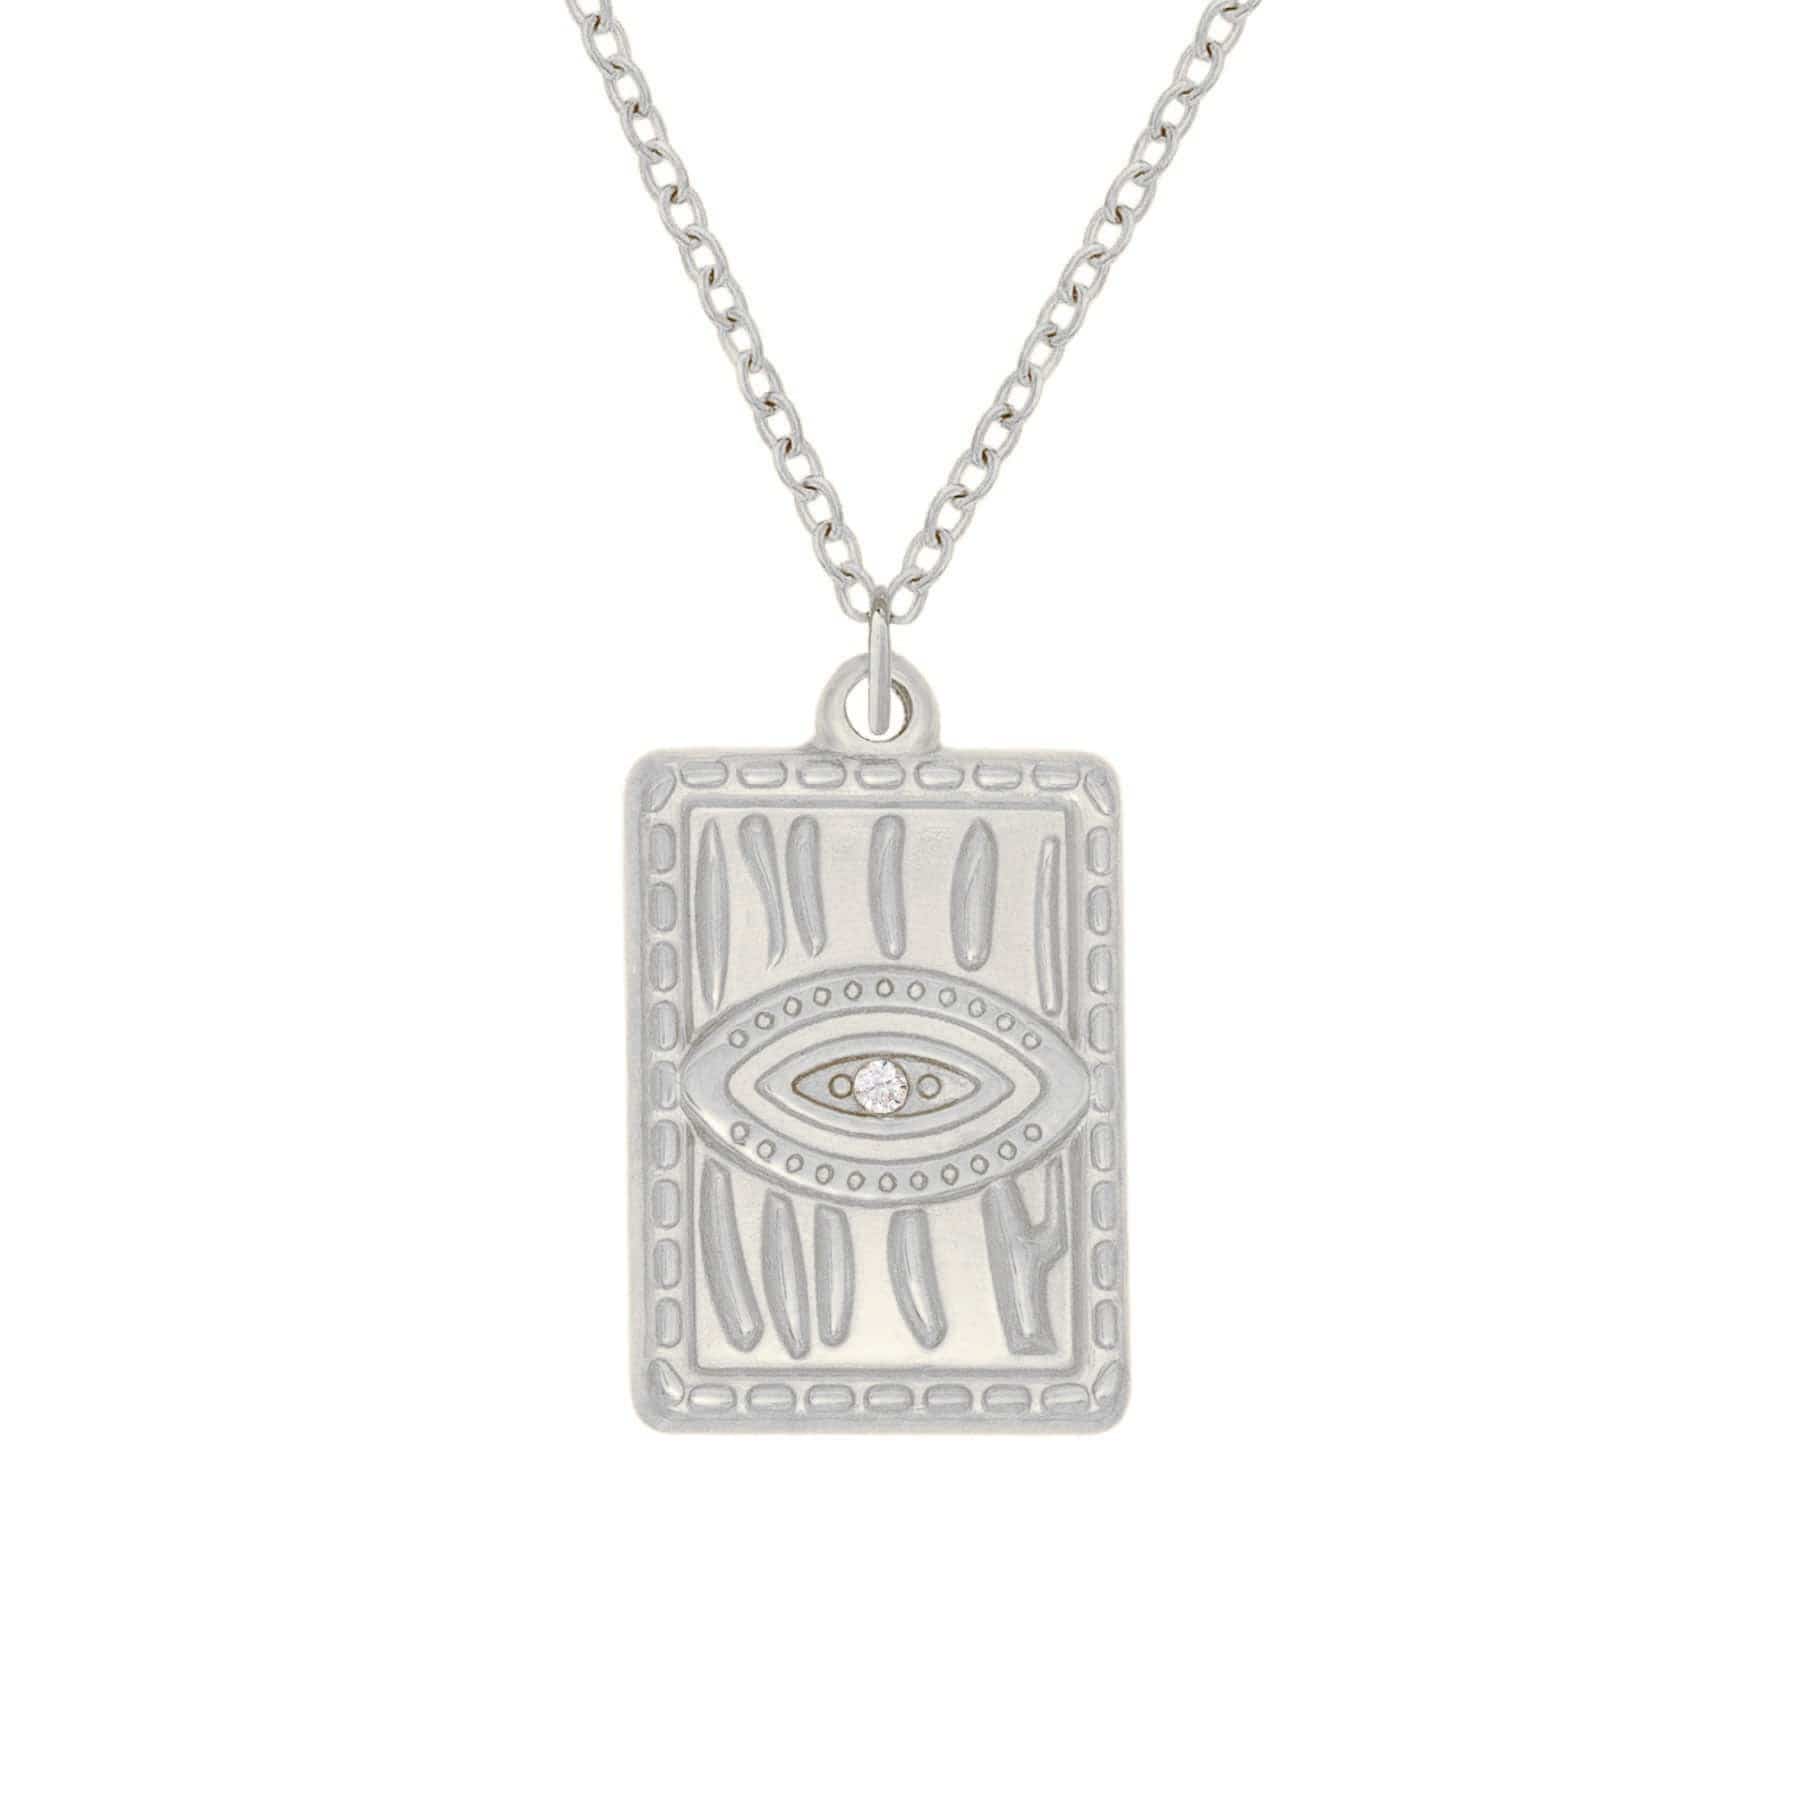 BohoMoon Stainless Steel Virtue Necklace Silver